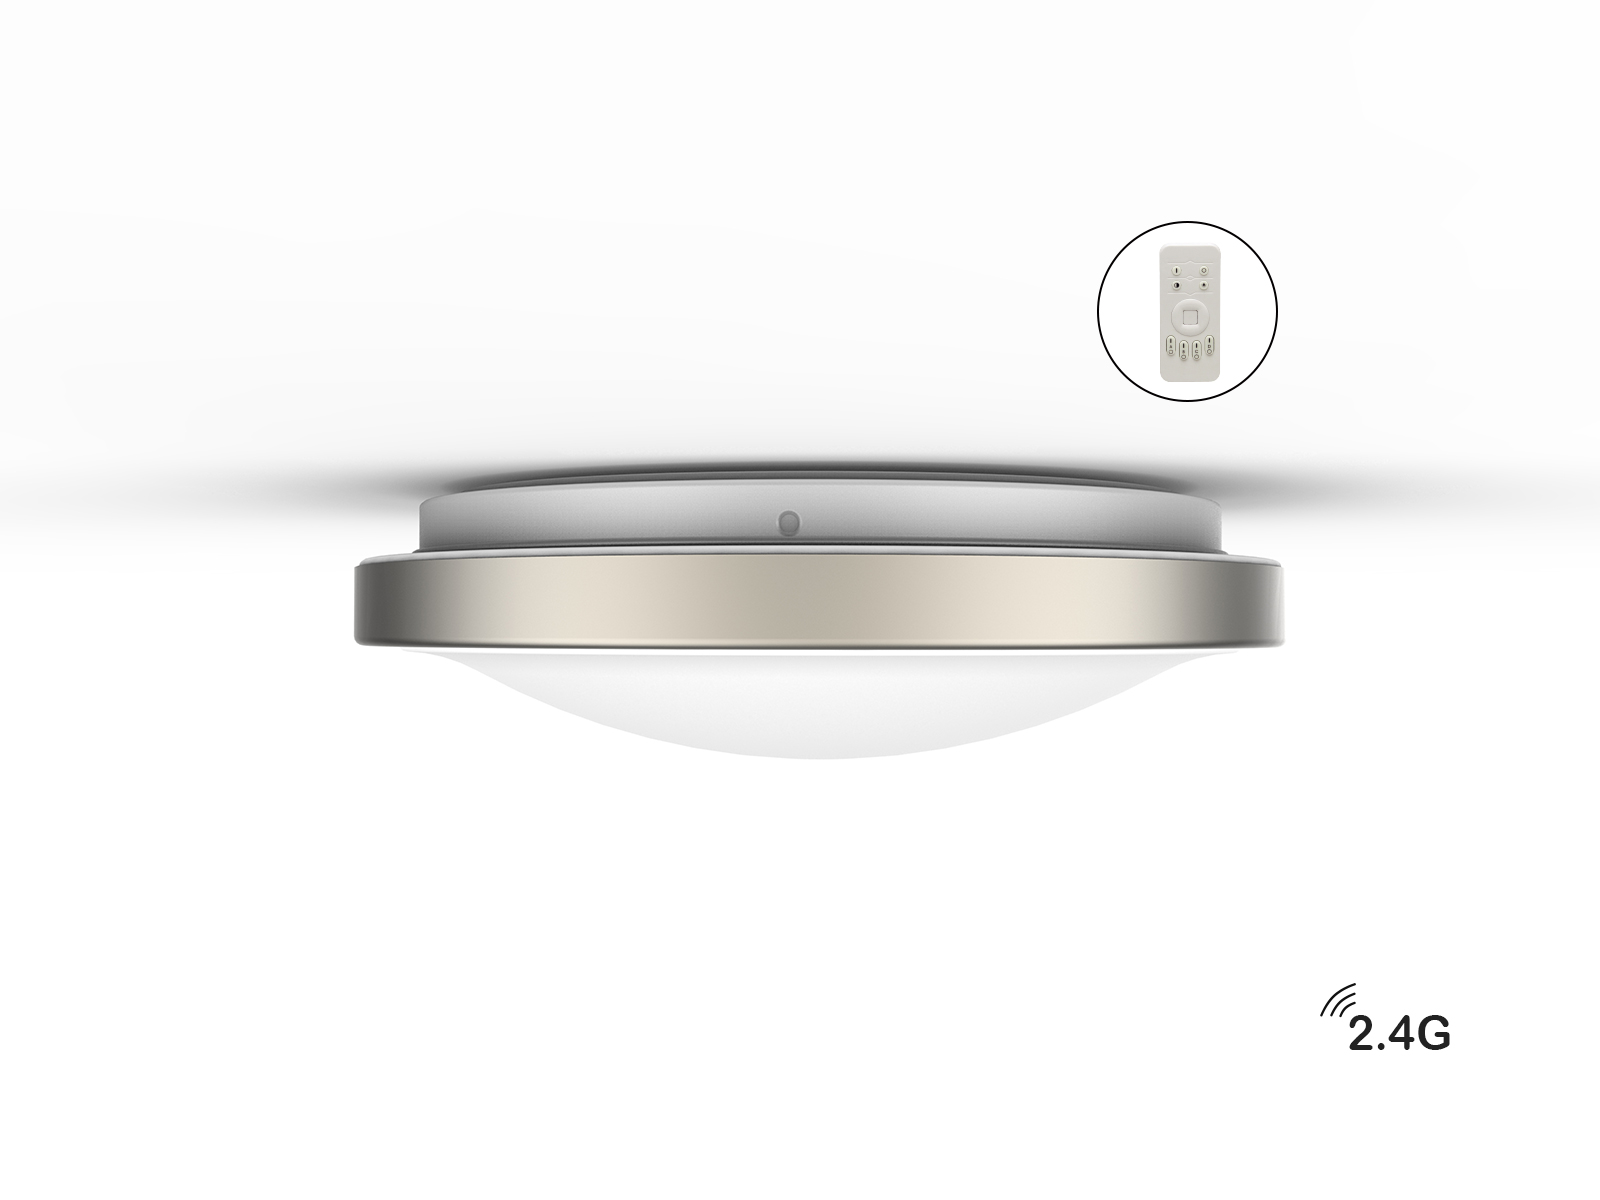 Wireless Ceiling or Wall Light w/ Remote Control 